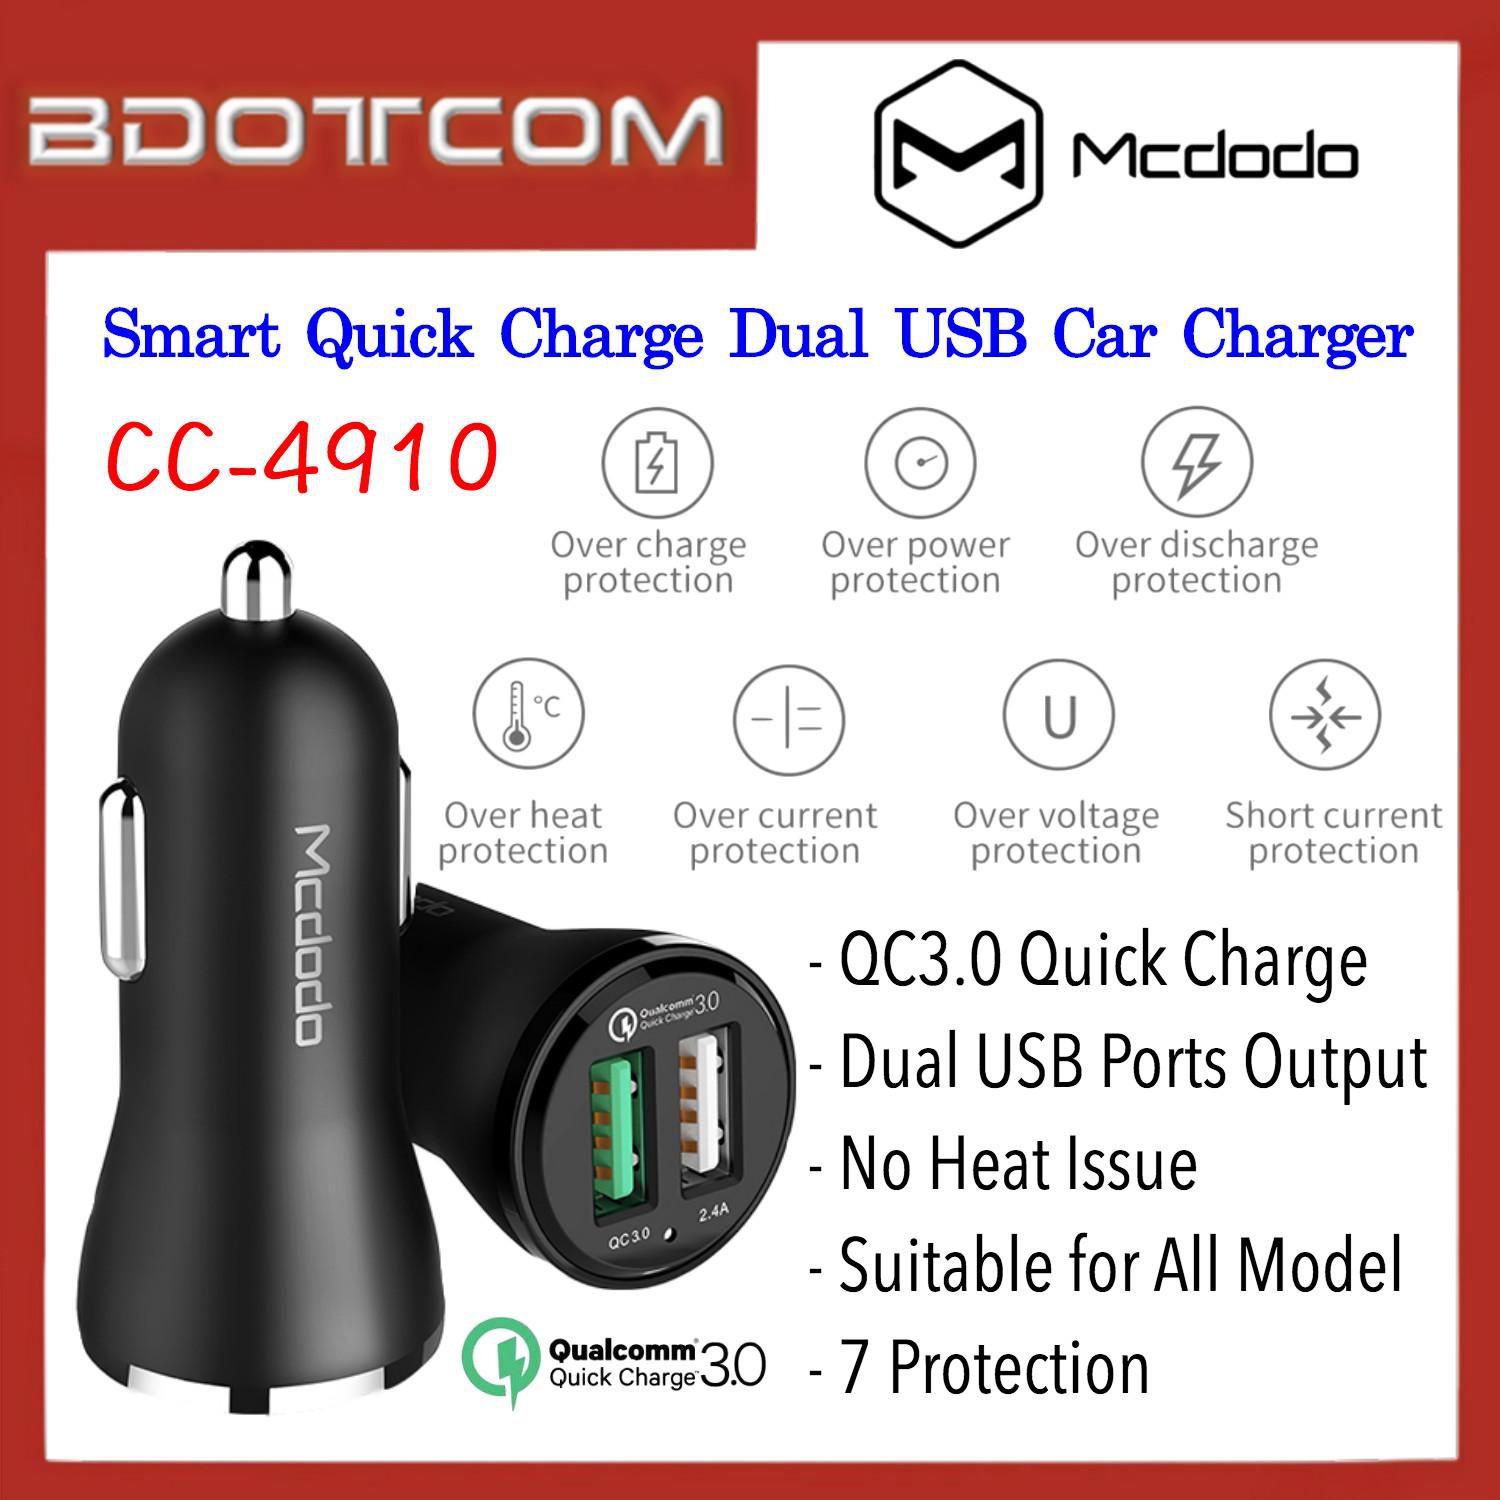 Mcdodo CC-4910 30W Dual USB Port QC3.0 Quick Charge Car Charger